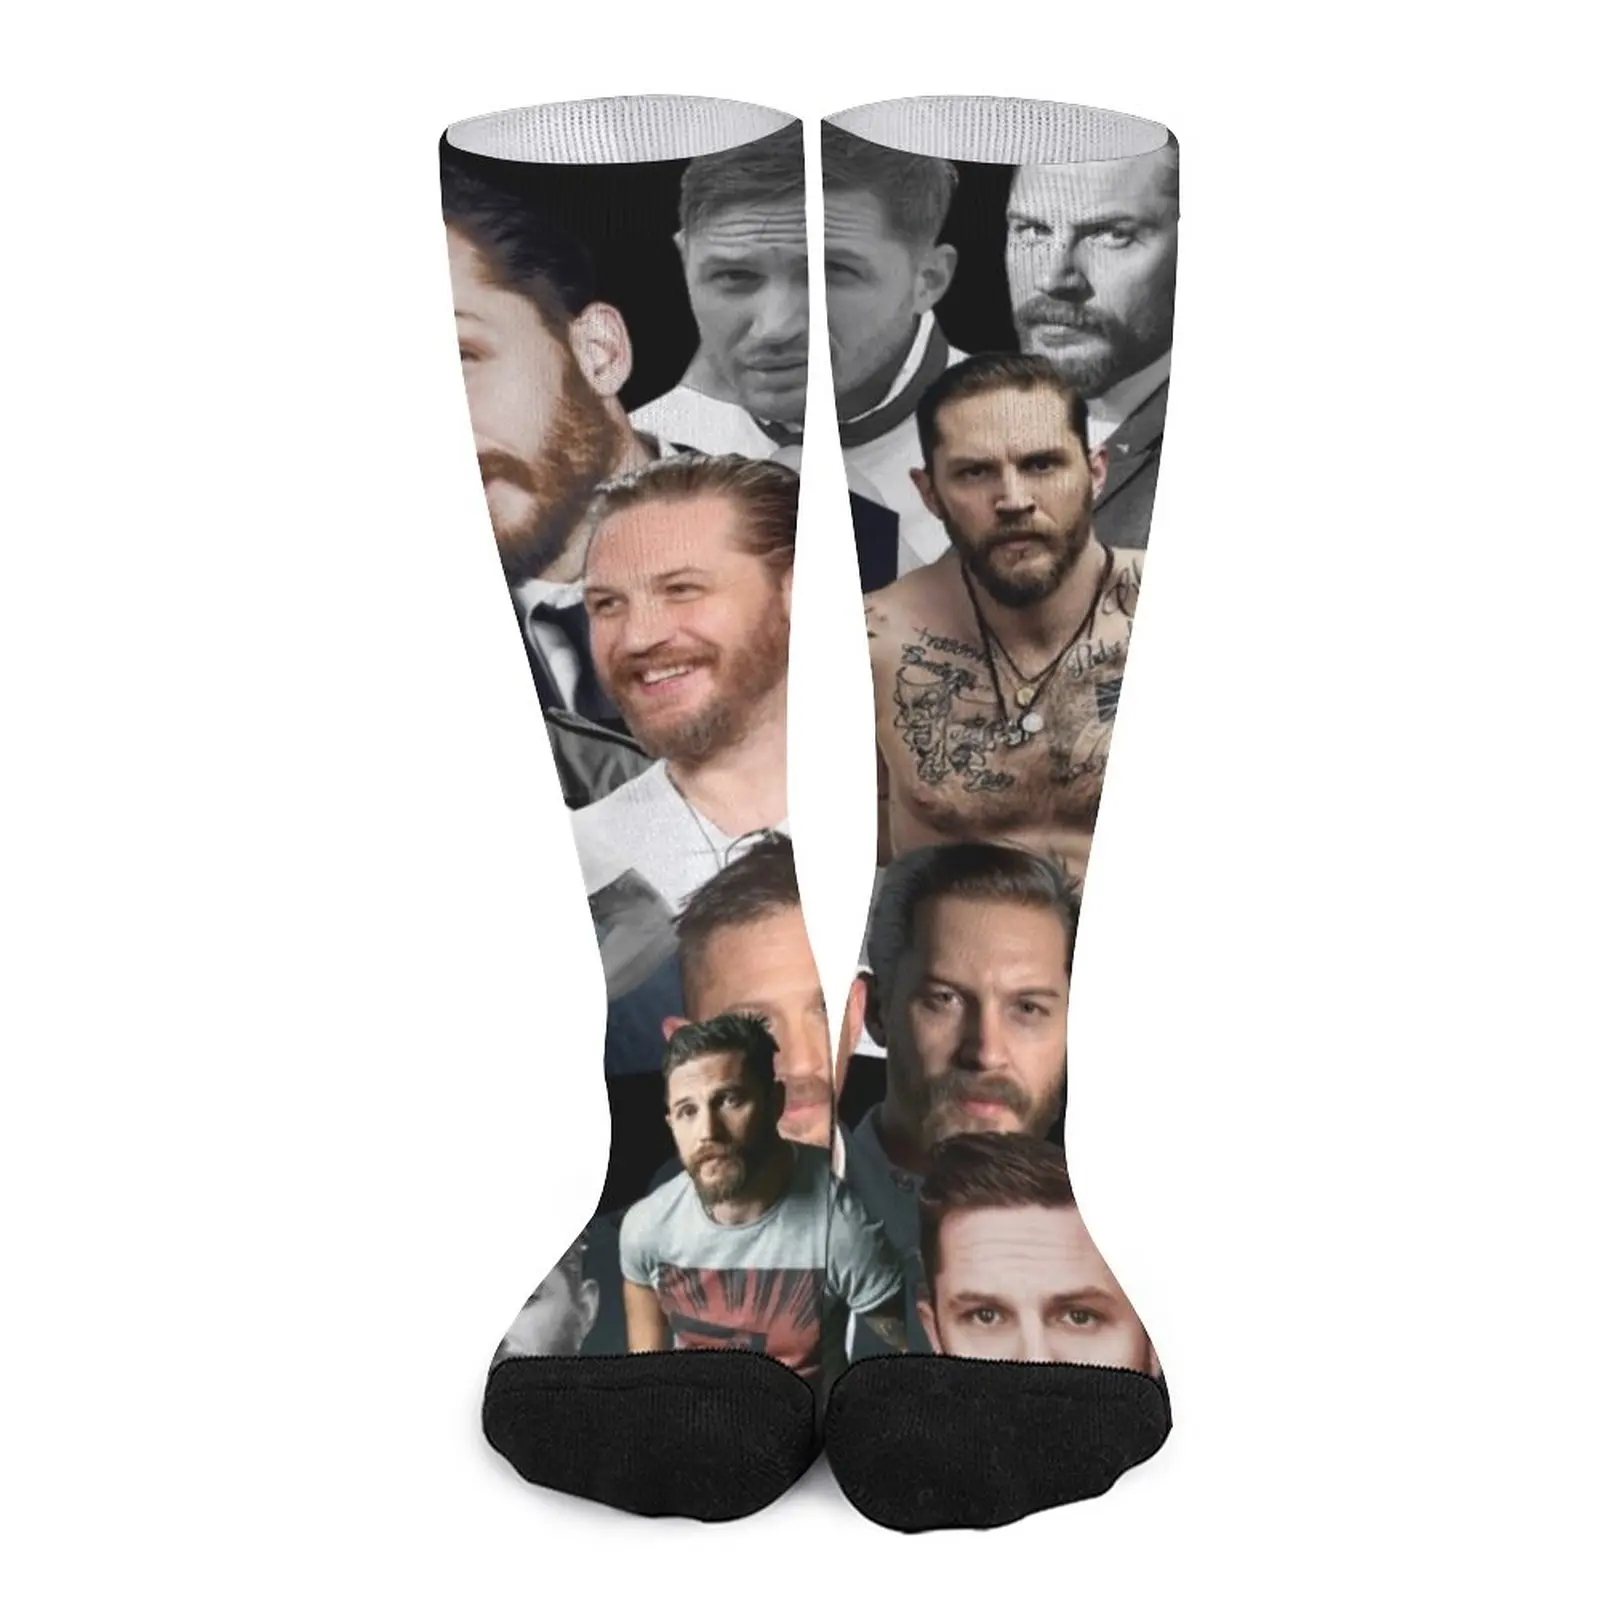 tom hardy photo collage Socks Sports socks socks for men Lots journamm natural collection stickers diy scrapbooking materials collage photo album decor junk journal craft sticker stationery